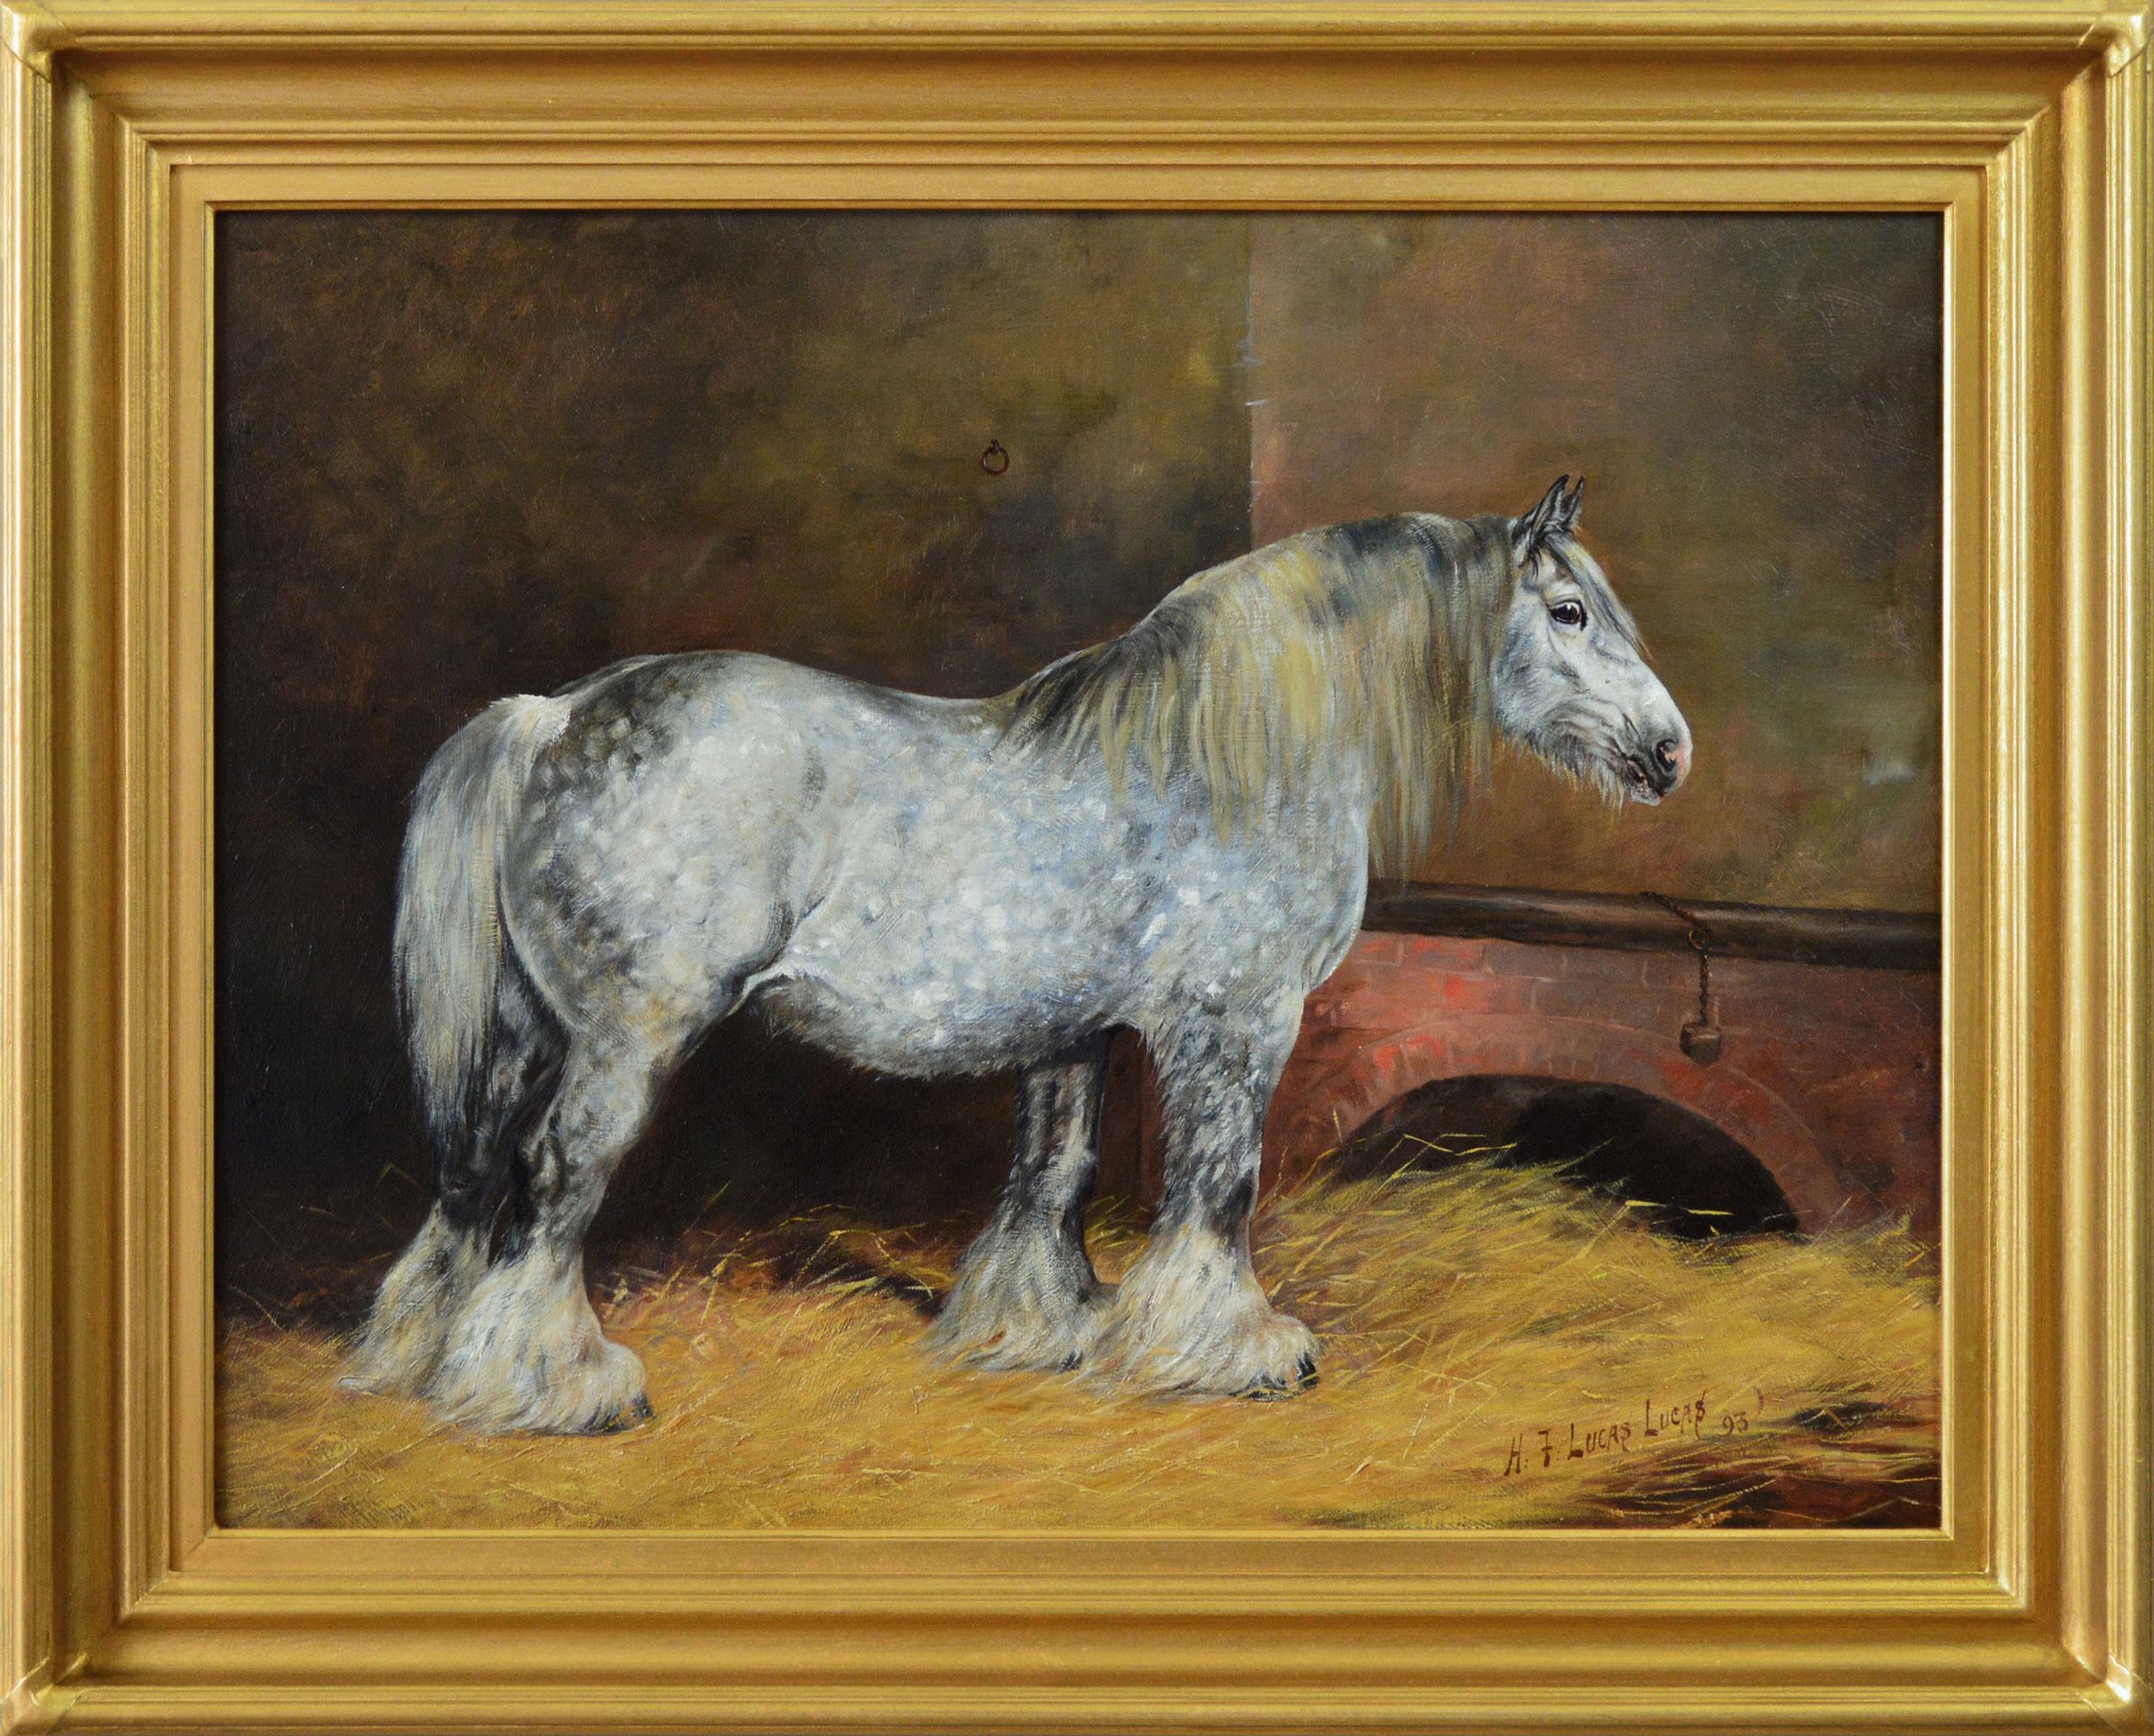 Henry Frederick Lucas Lucas  Animal Painting - 19th Century horse portrait oil painting of a champion Shire mare